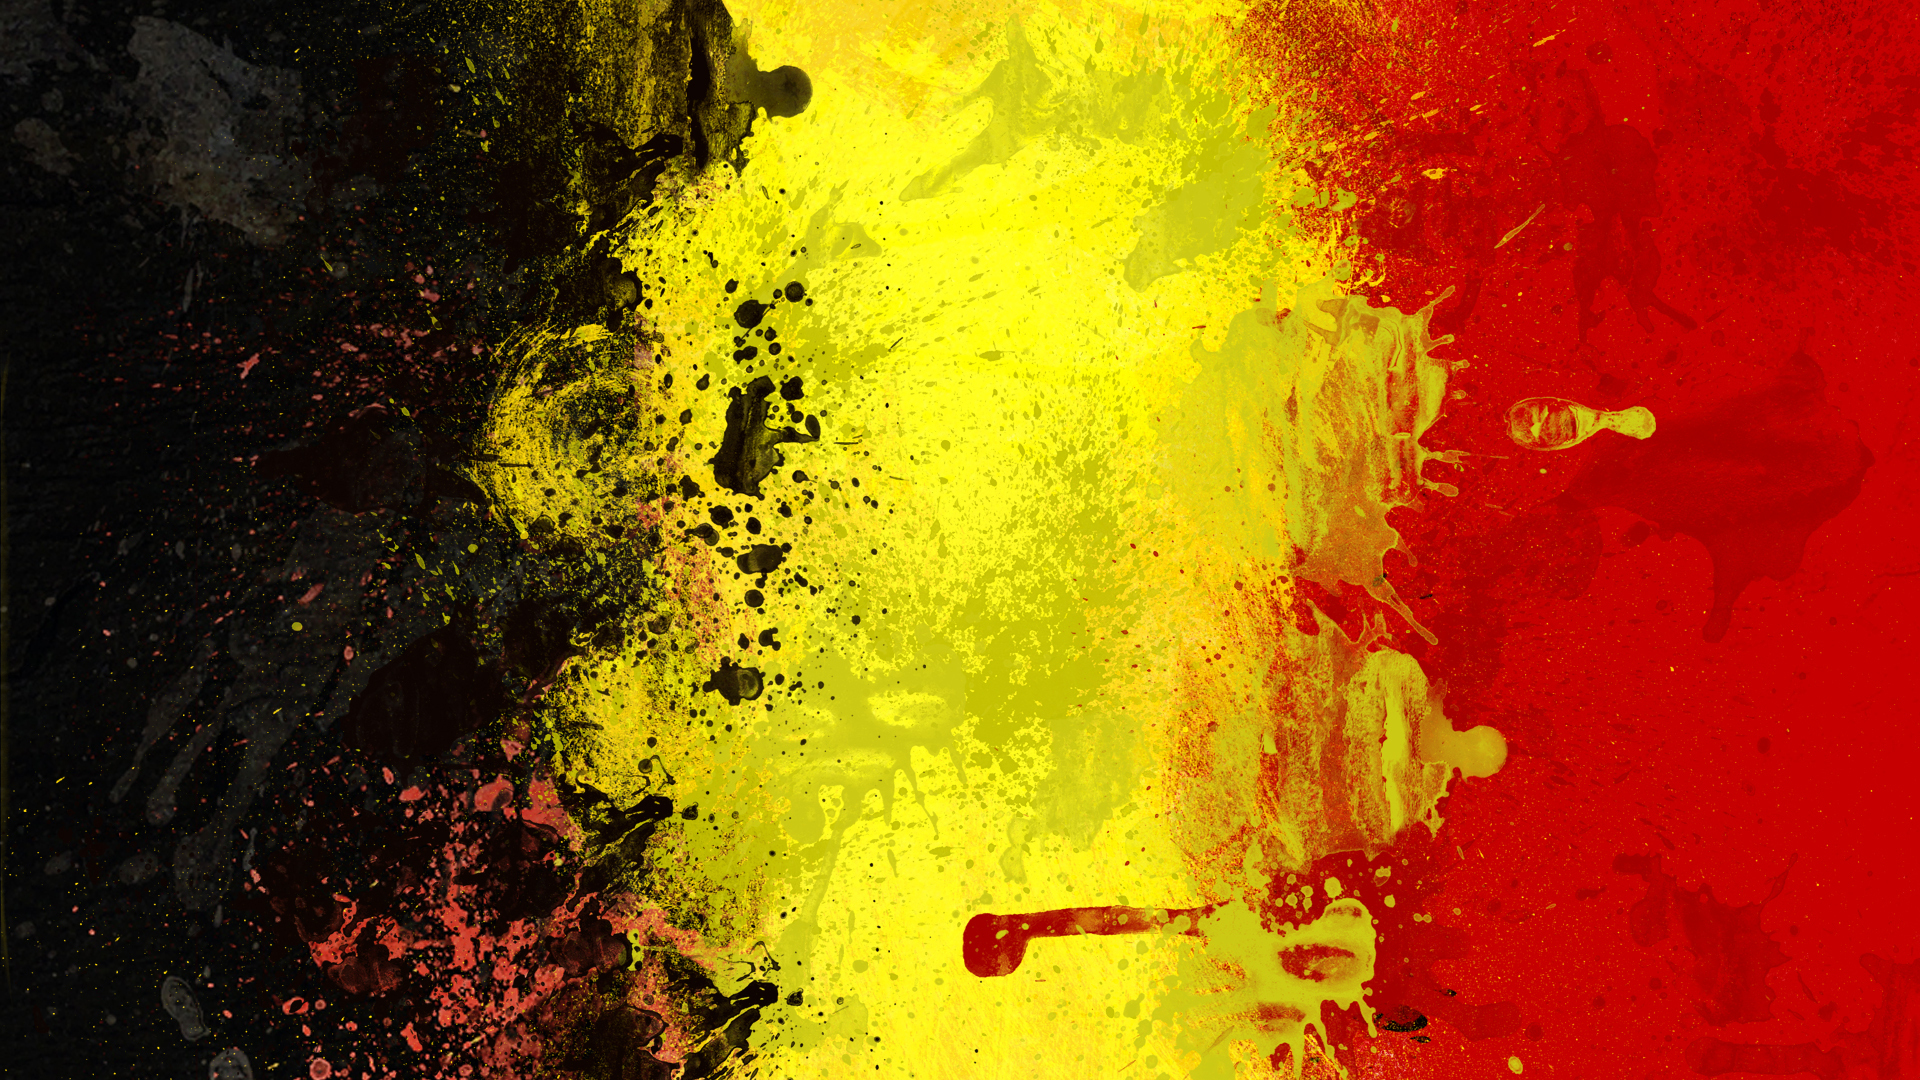 Tricolor Belgium wallpapers and images - wallpapers, pictures, photos